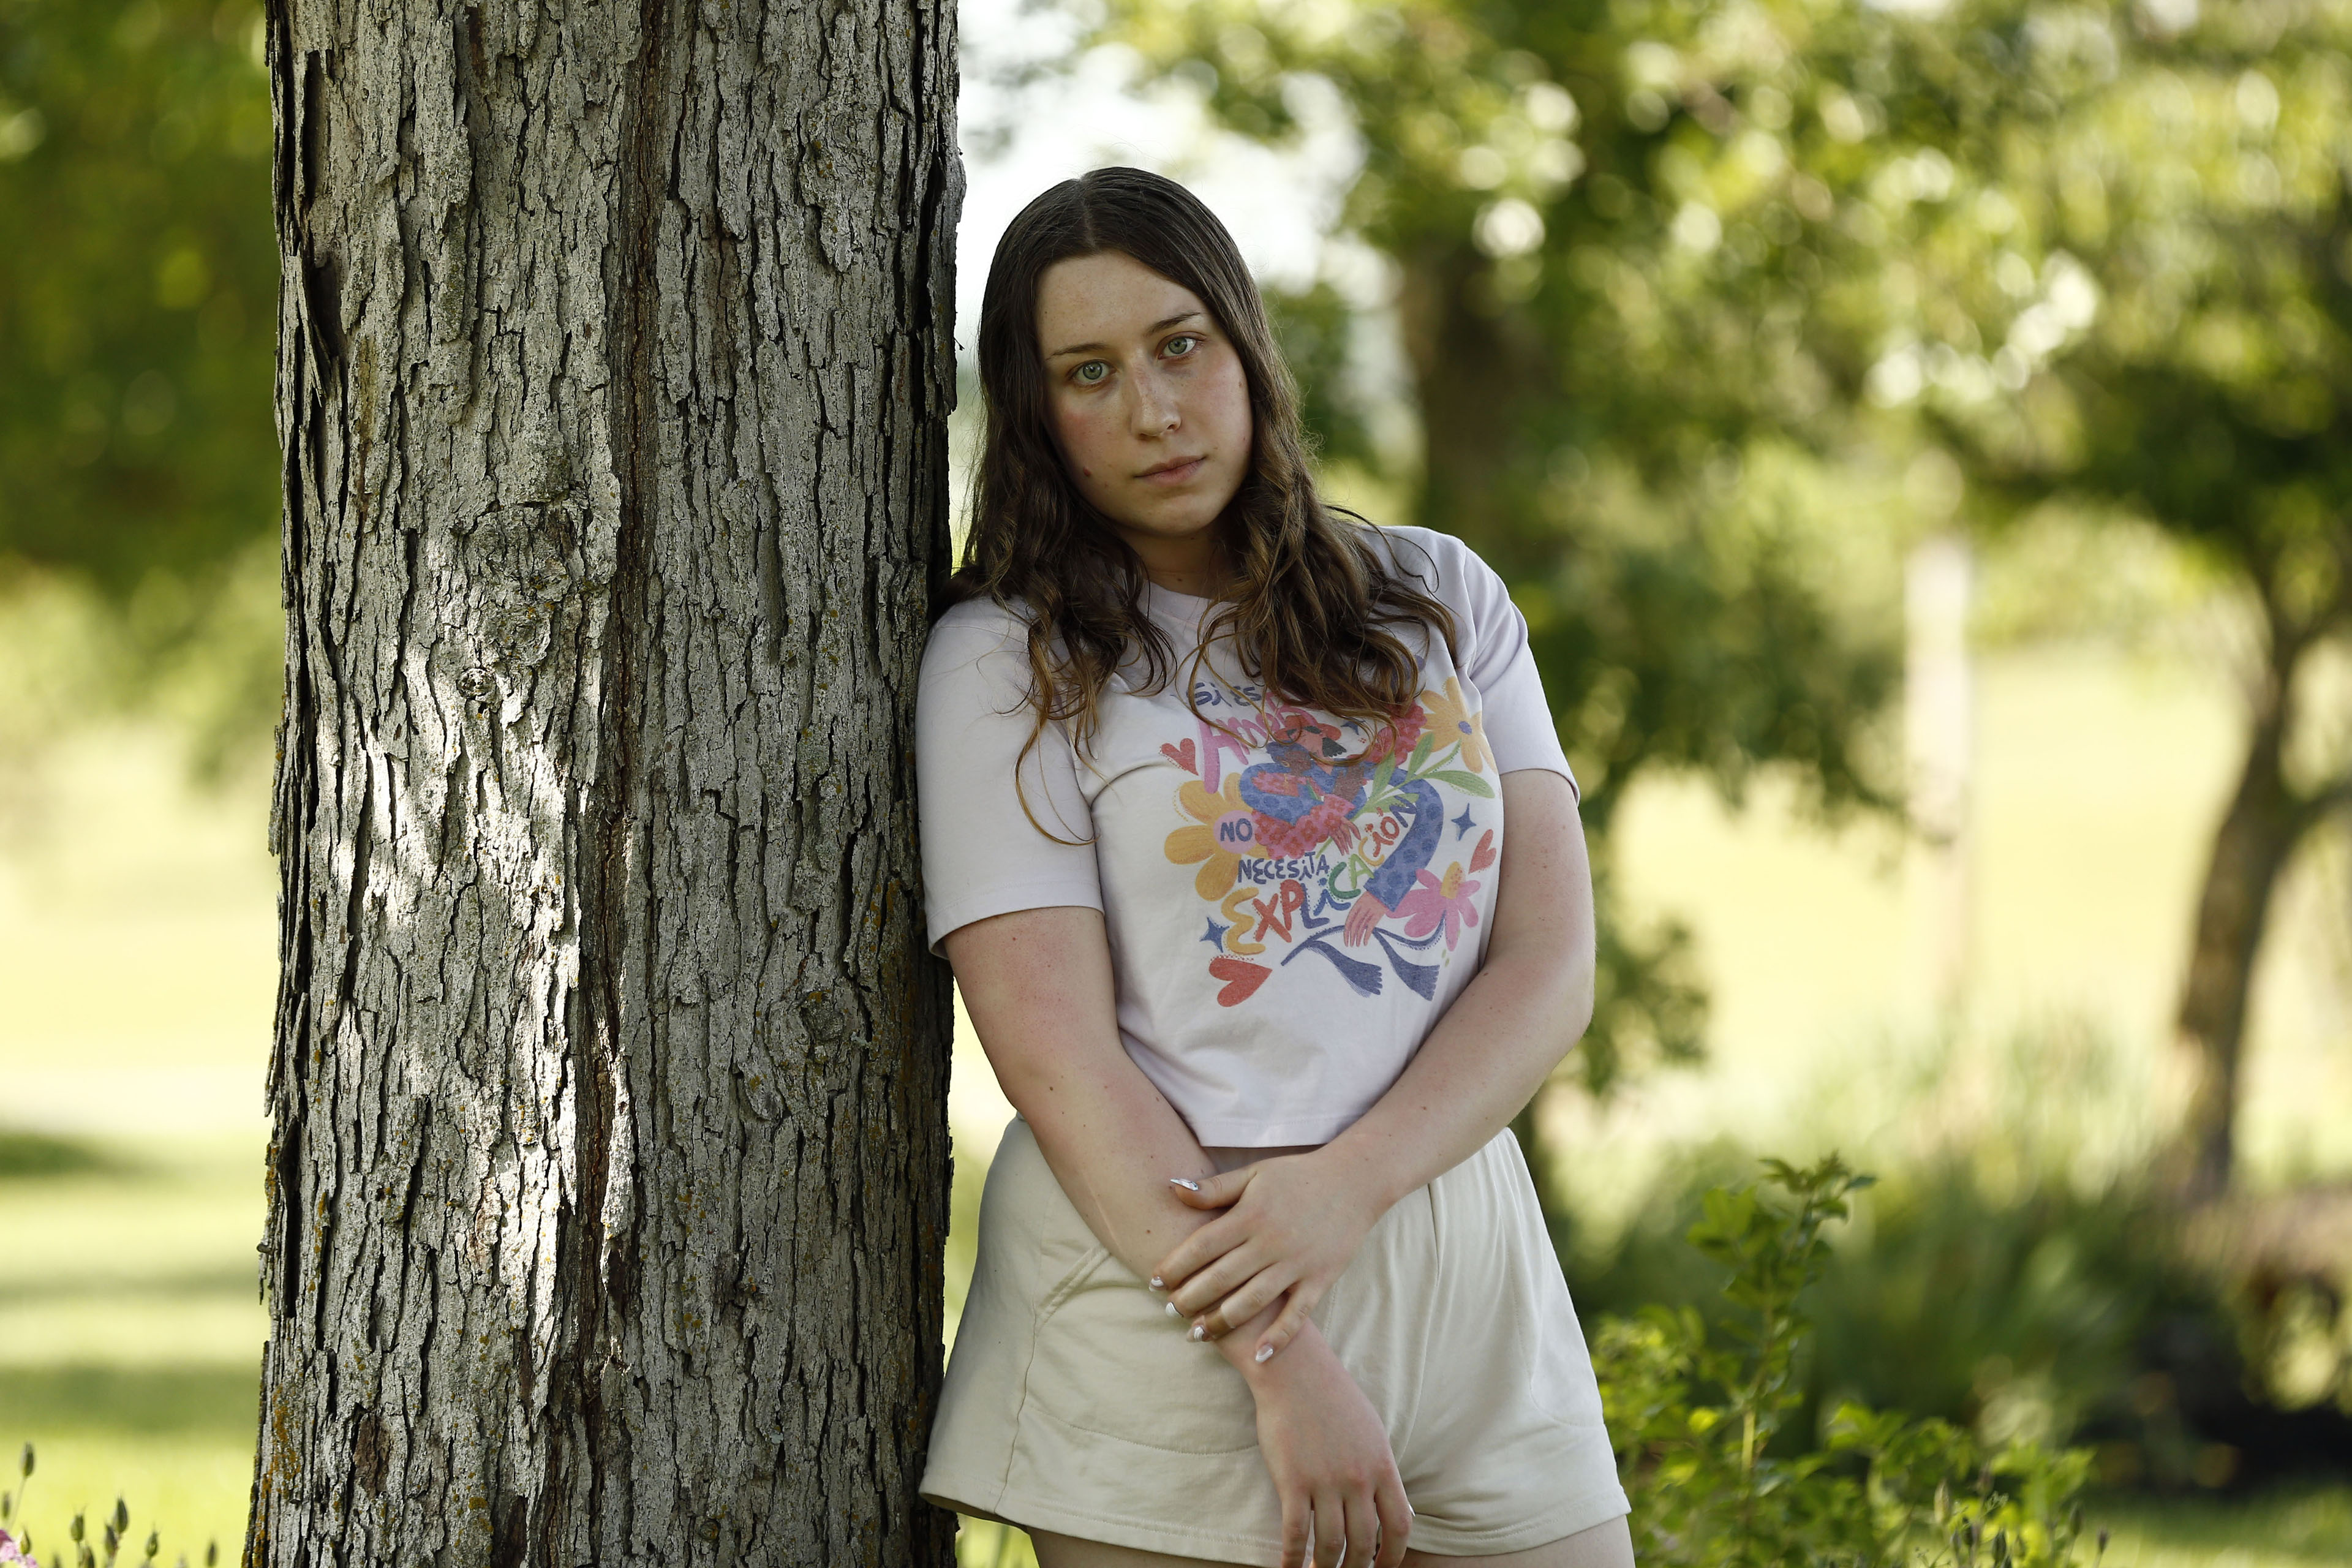 Gwen Schwarz is photographed standing outside on a sunny day. She leans against a tree and looks directly into the camera. She wears a colorful shirt and tan shorts.